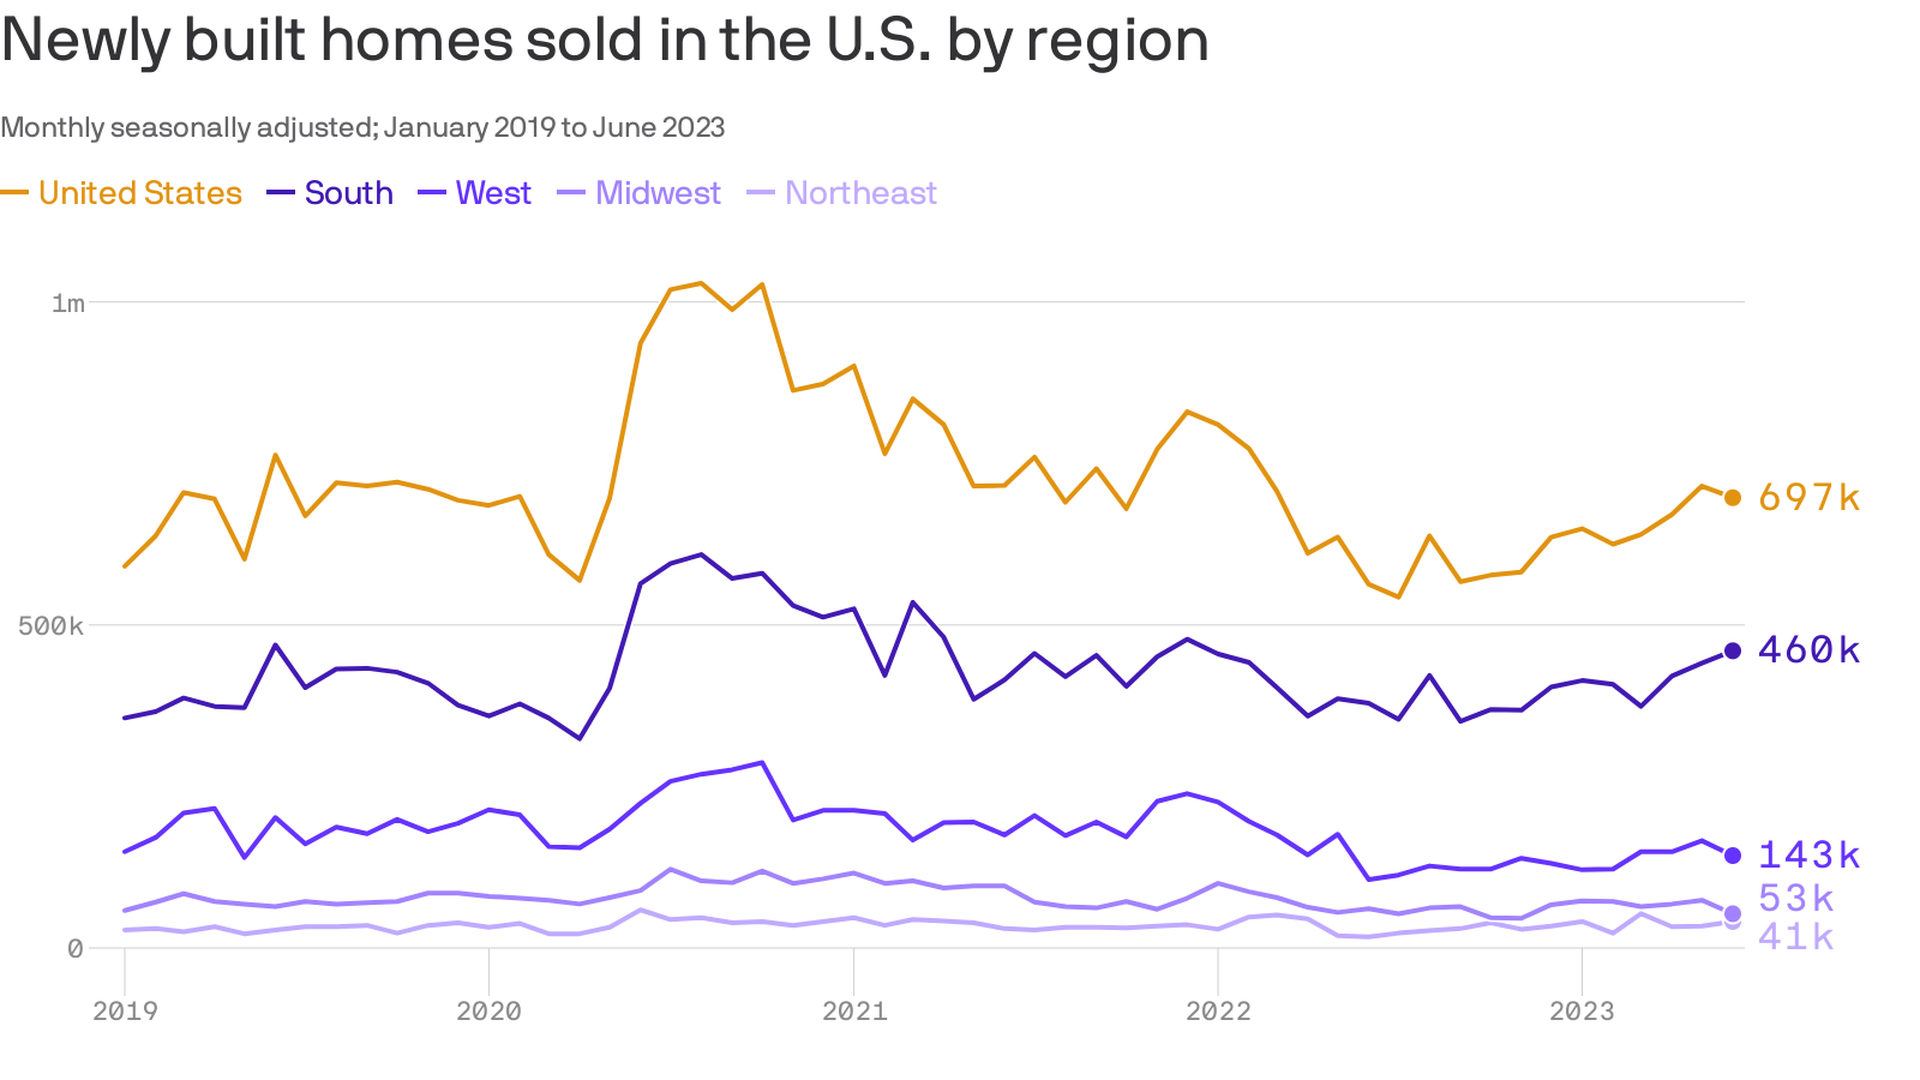 A line chart shows newly built homes sold in the U.S. by region. U.S. is at the top with 697K, next is South at 460K, West at 143K, Midwest at 53K and last is Northeast at 41K